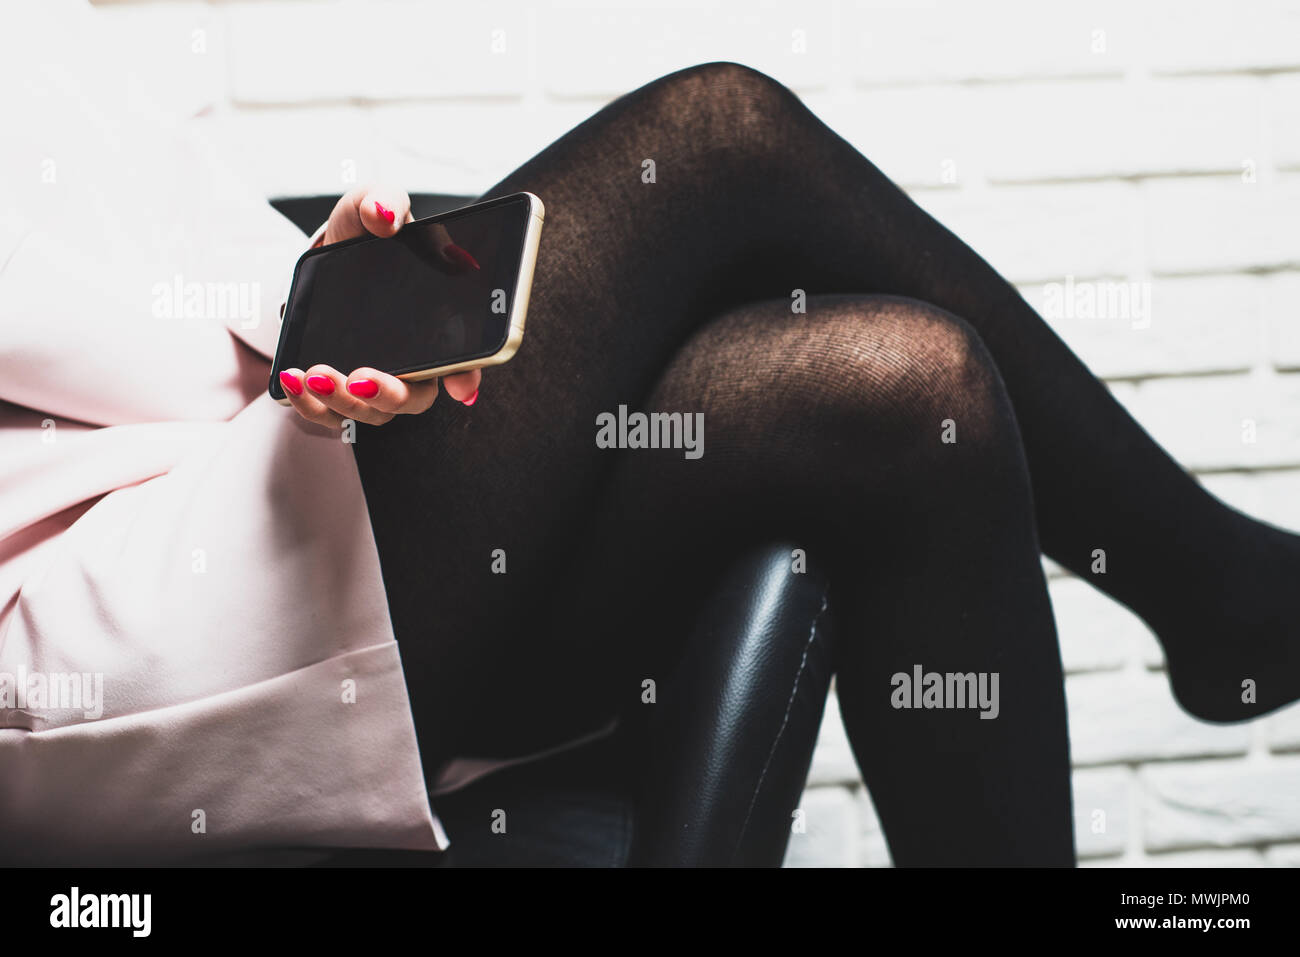 A woman sitting on a chair holds in her hand a phone directed to the camera. A woman wearing a pink skirt and black tights sits worried, thoughtful, p Stock Photo